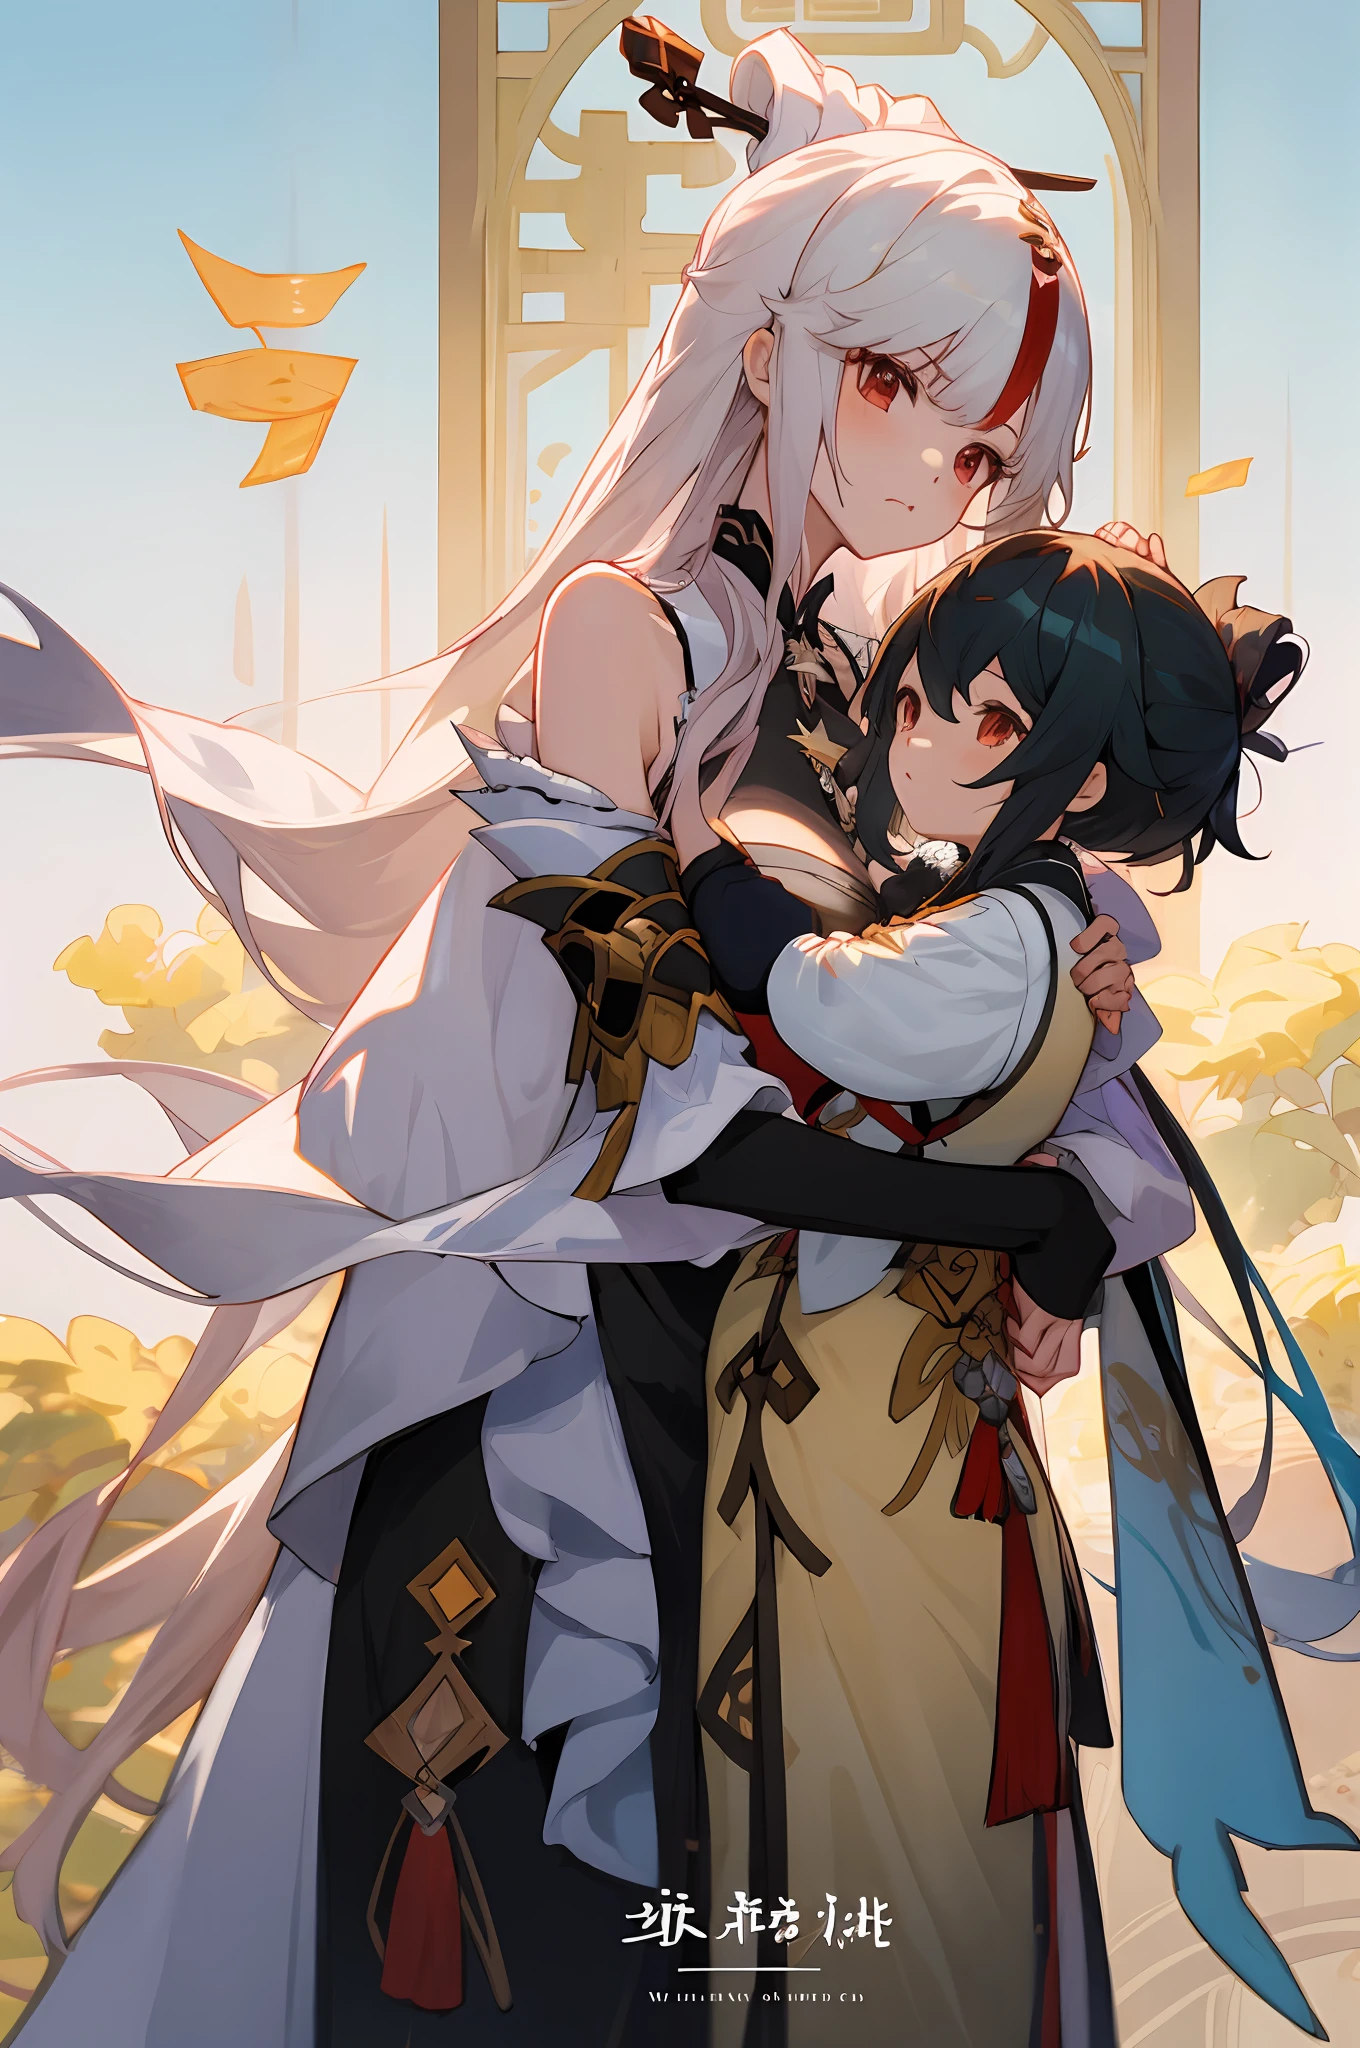 anime image of two women dressed in traditional china clothing in money, Cheongsam, palace a girl in hanfu, frown, wlop and sakimichan, long hair, white haired deity, characters from azur lane, anime fantasy illustration, from the azur lane videogame, genshin, artwork in the style of guweiz, cultivator detailed art, two beautiful anime girls, mother and child, symbol of maternal love, mother and child, such as photos of mother and 